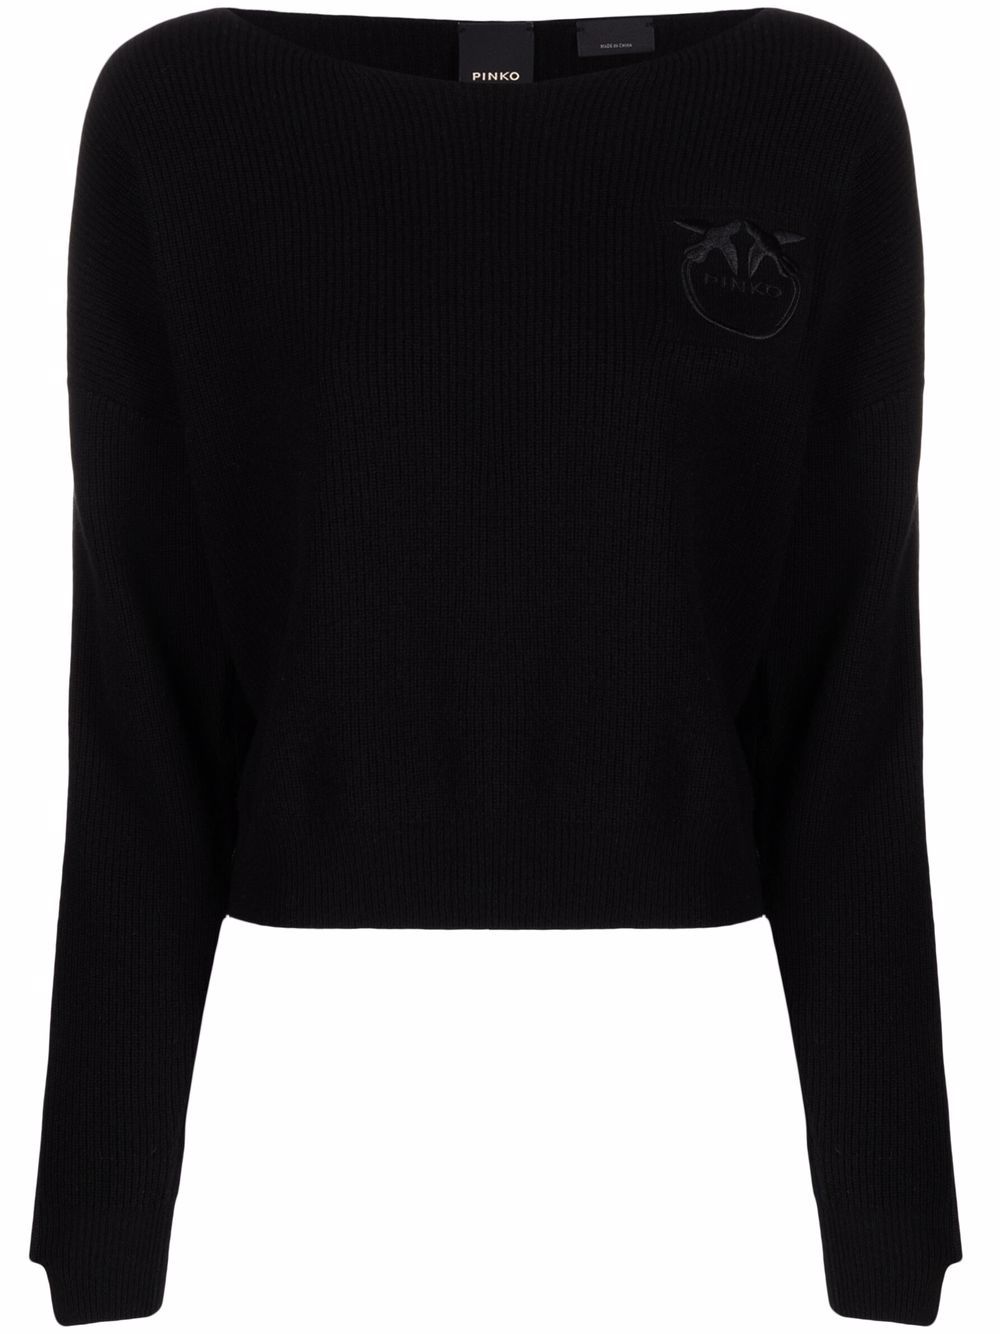 PINKO logo-embroidered Knitted Jumper - Farfetch